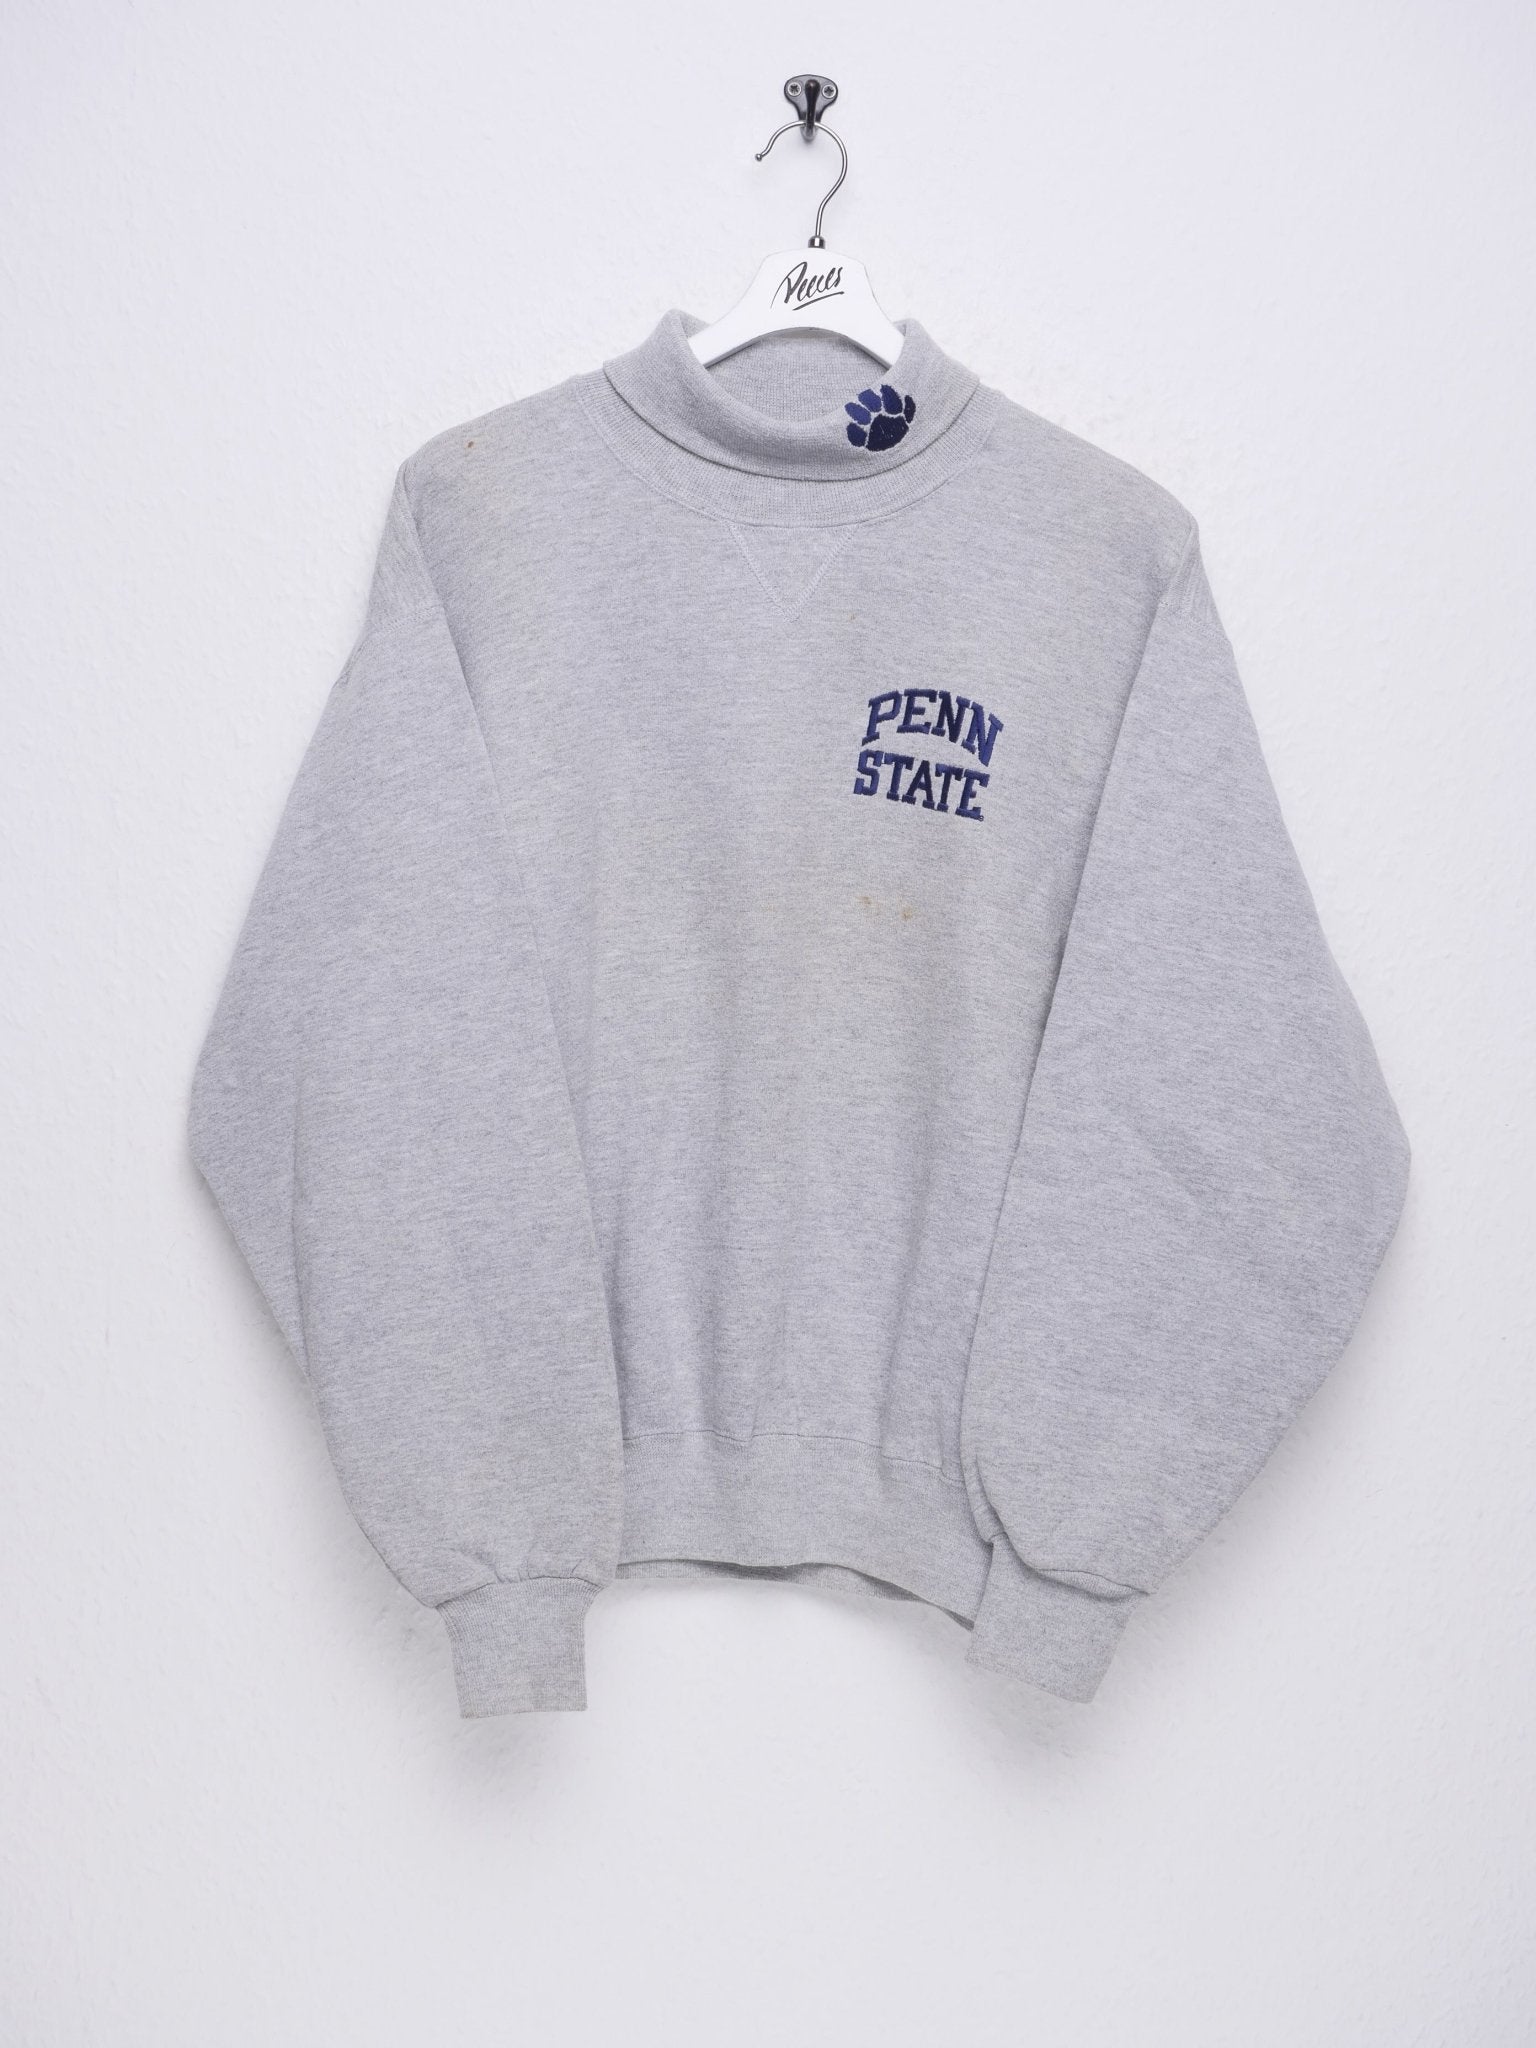 Russell Athletic Pennsylvania State University embroidered Logo Vintage Turtle Neck Sweater - Peeces